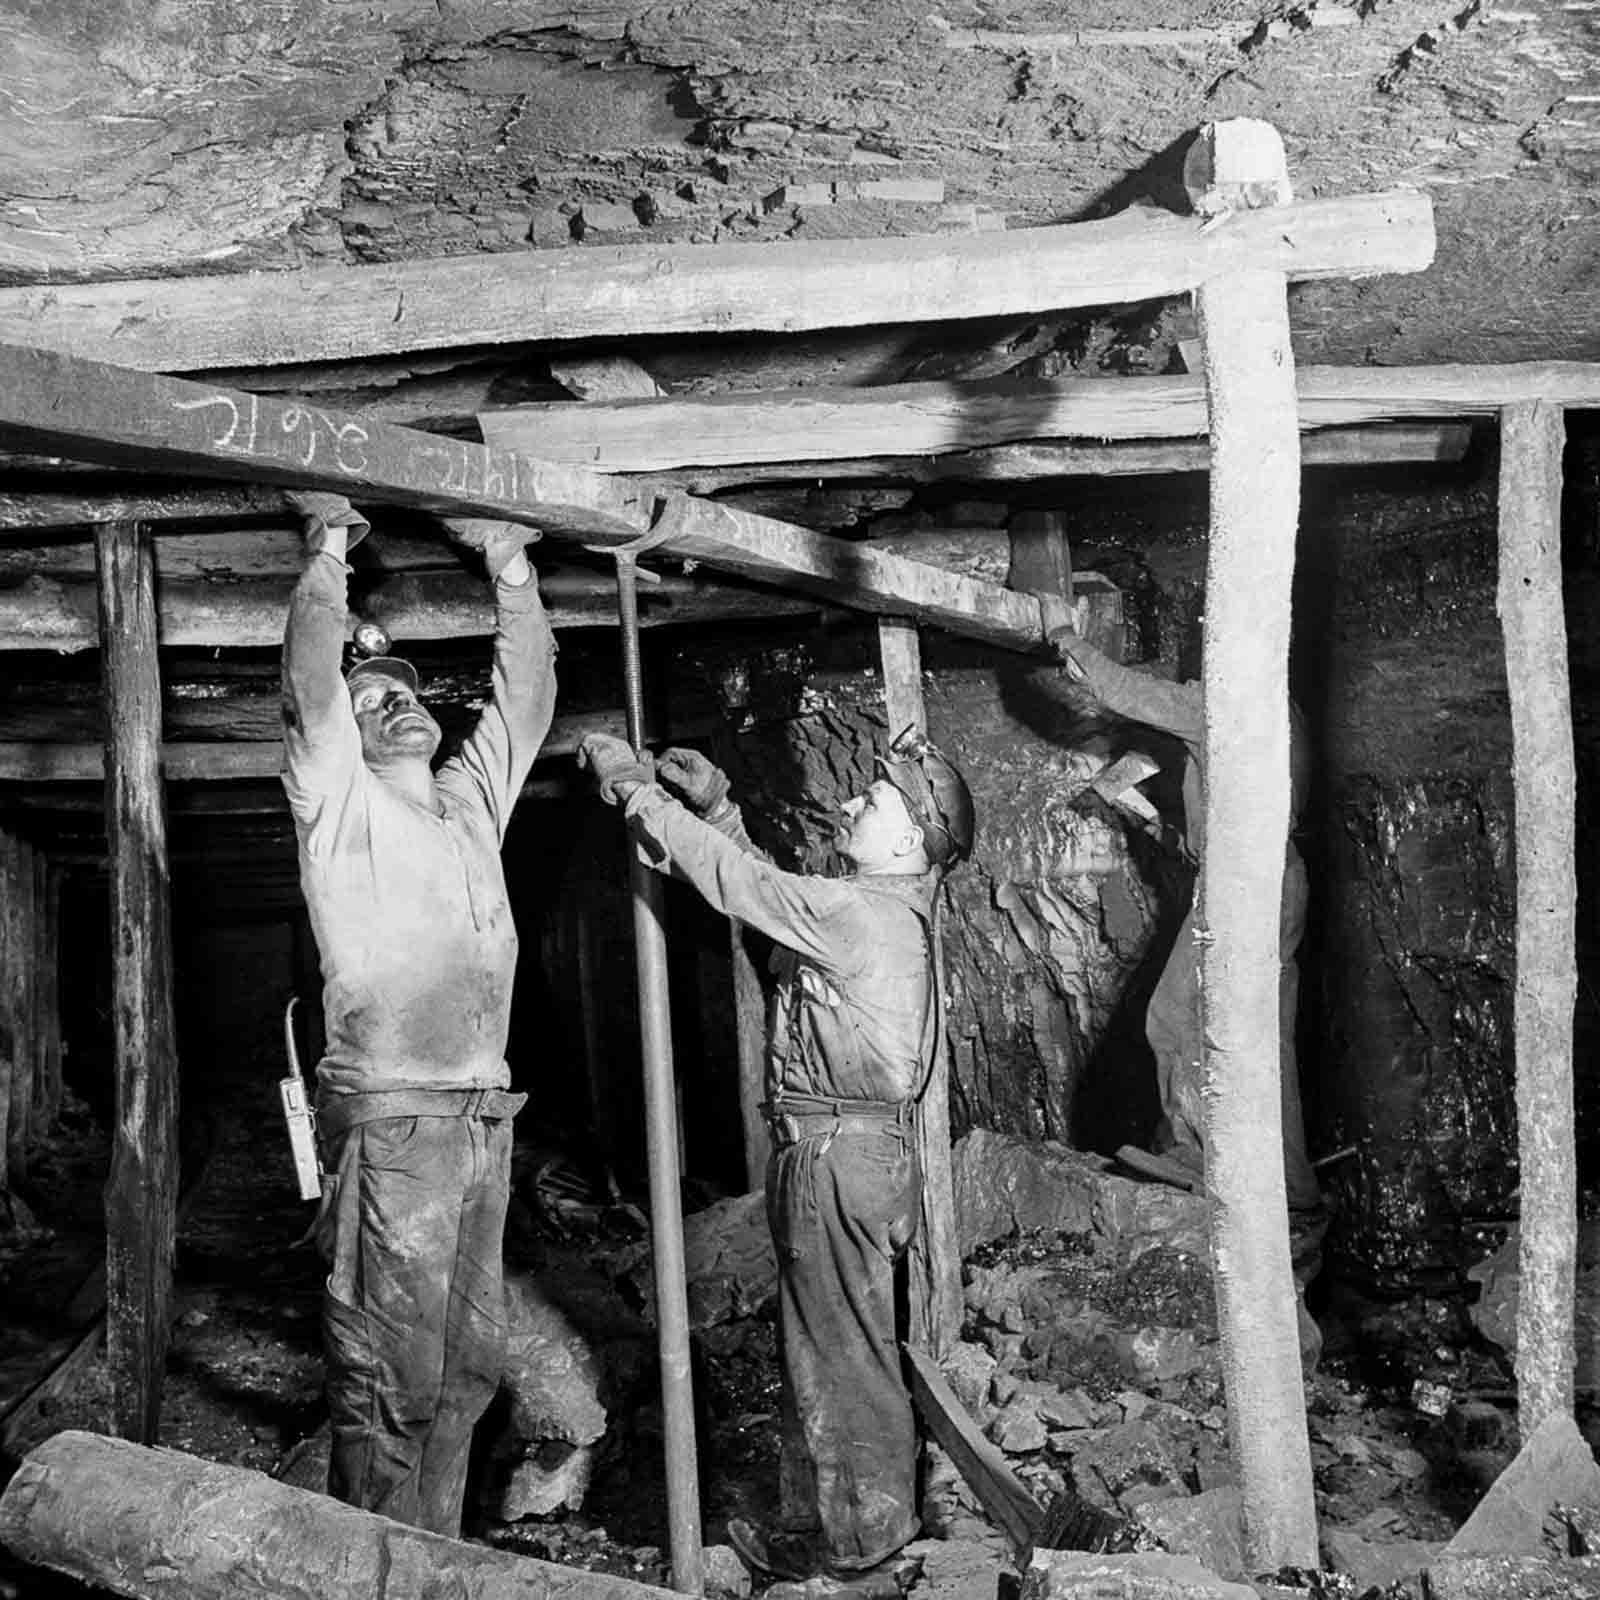 Miners install timber supports.